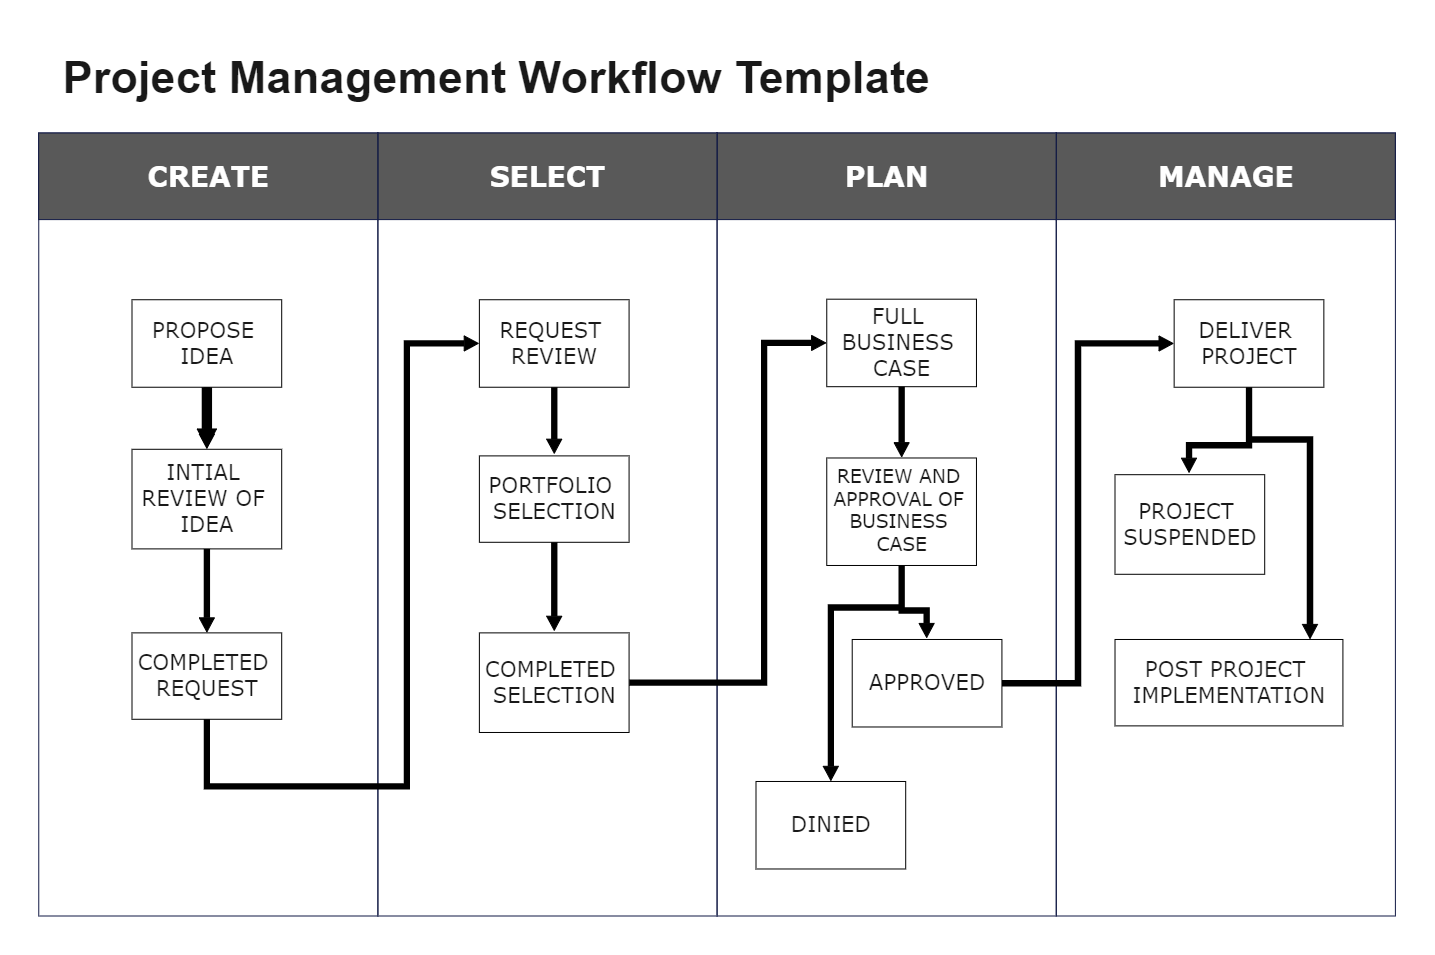 Project workflow template